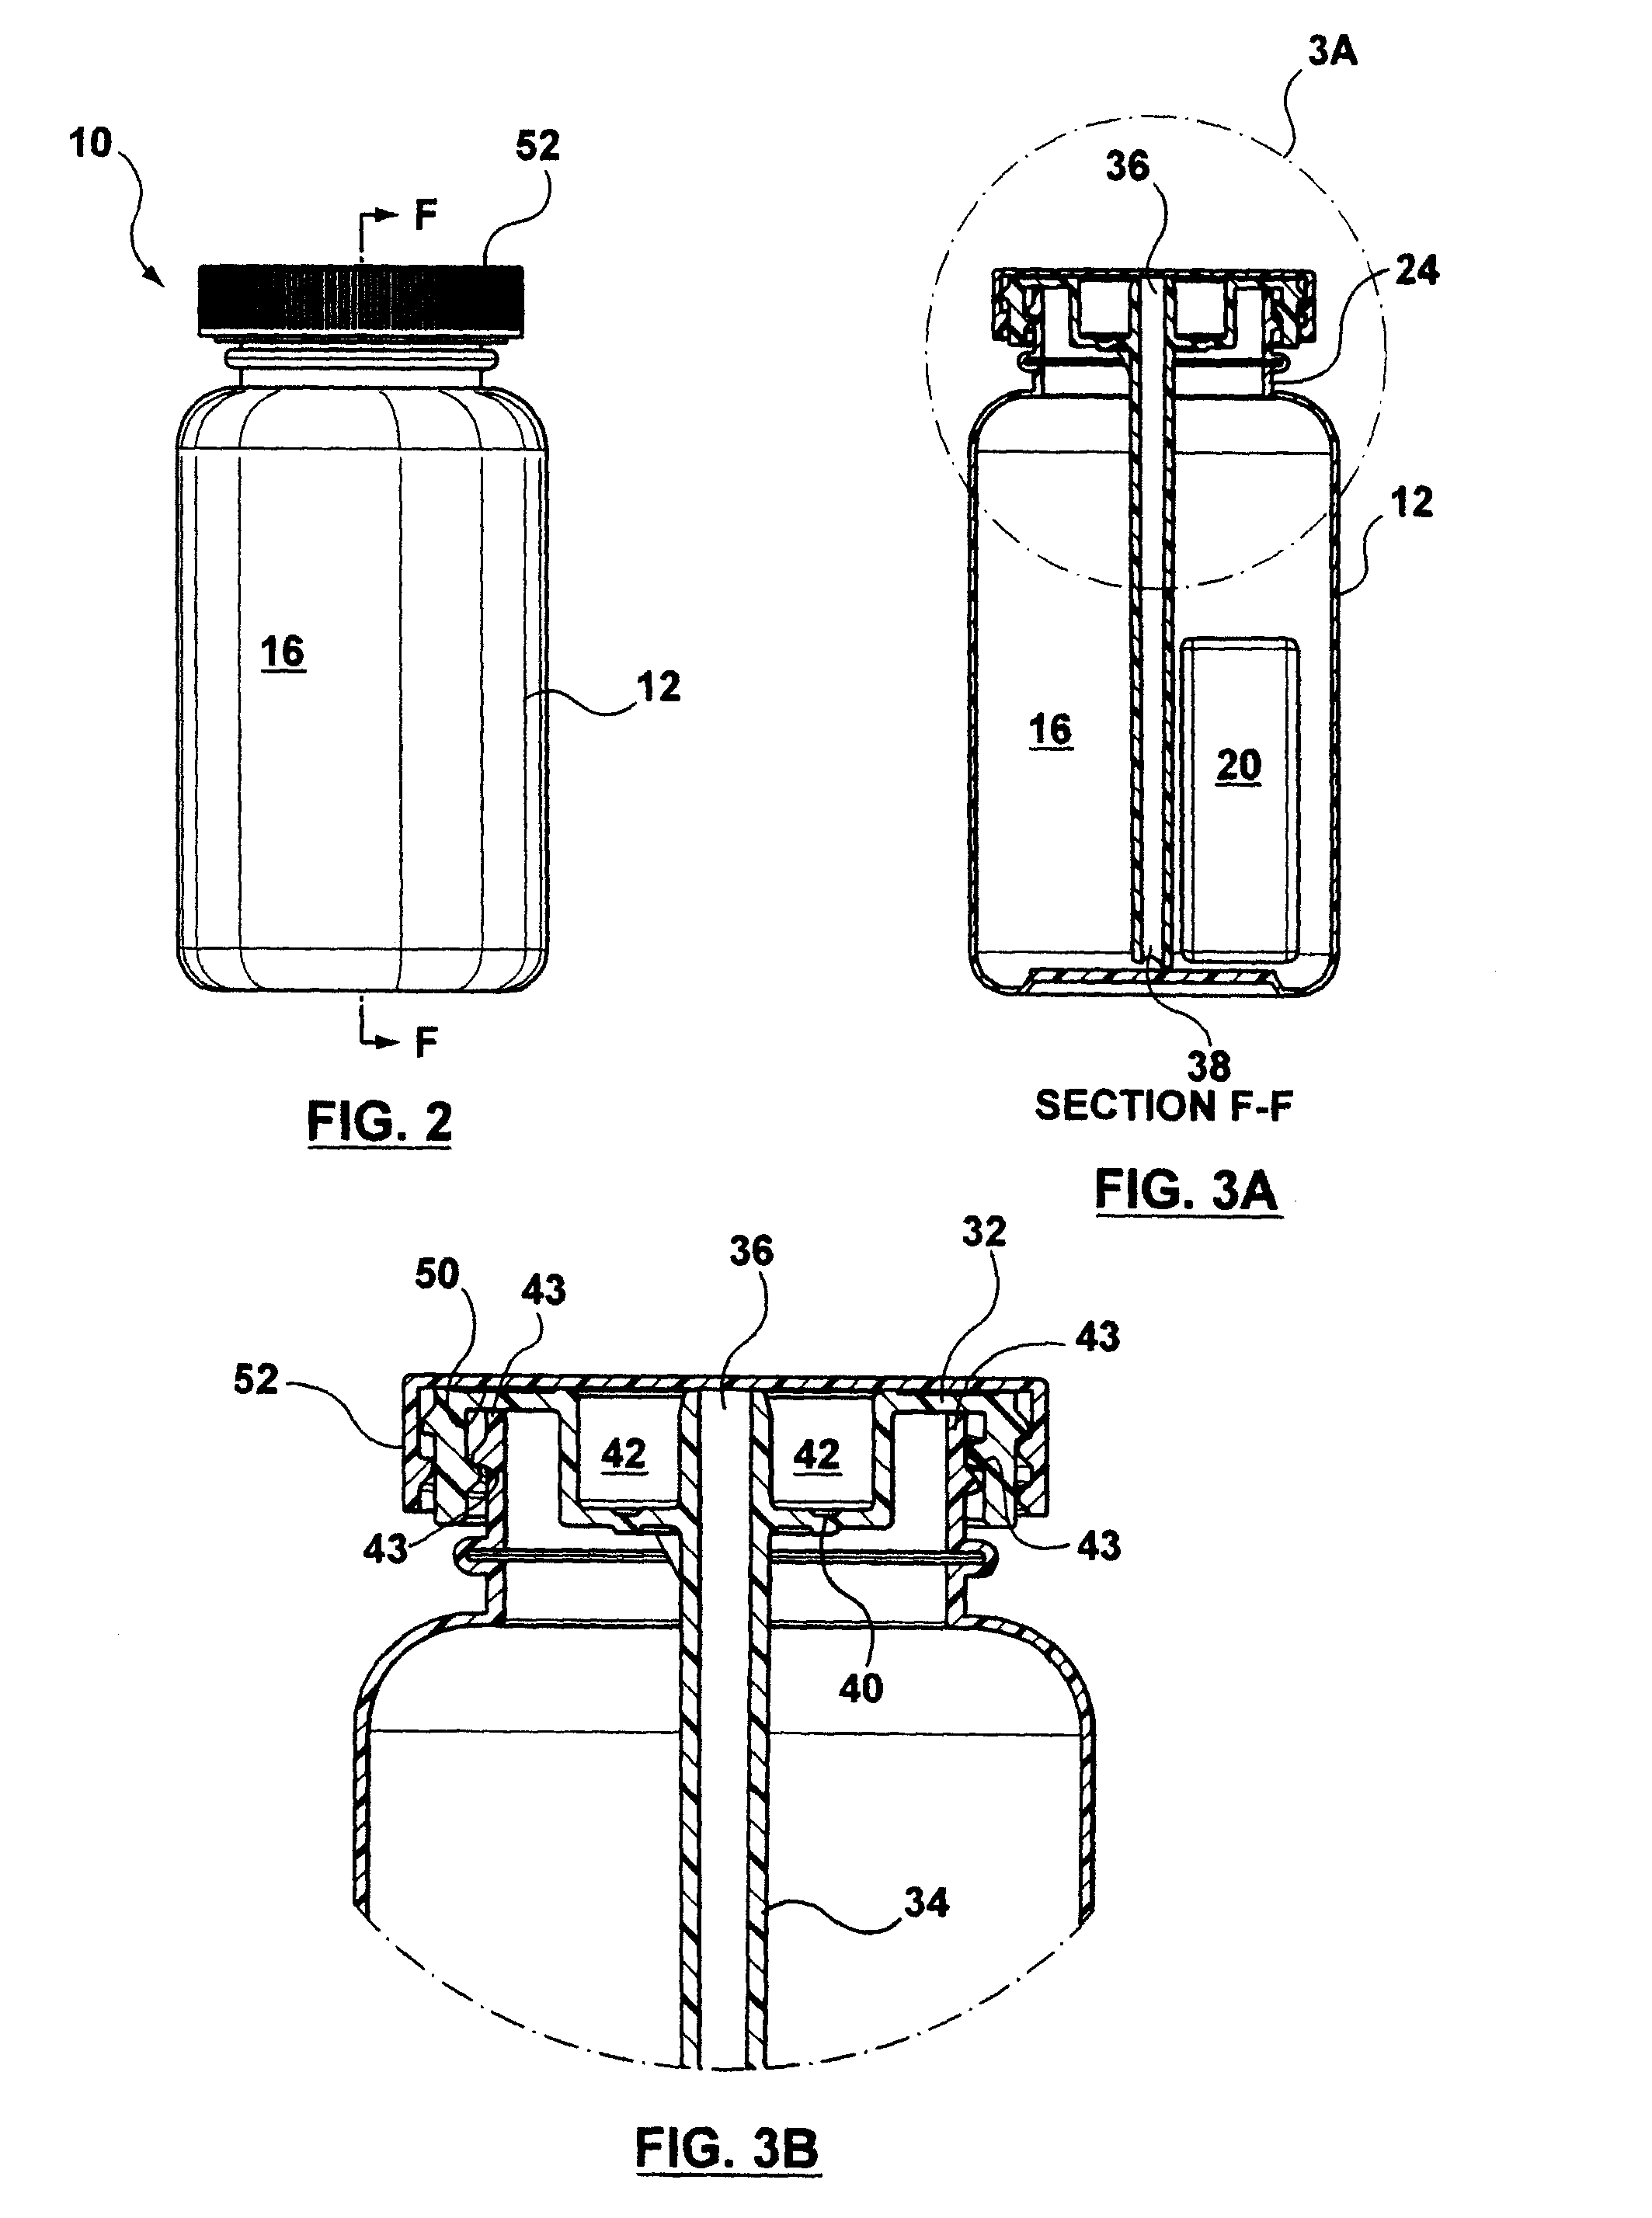 Air conditioning lubricant delivery vessel, method and system